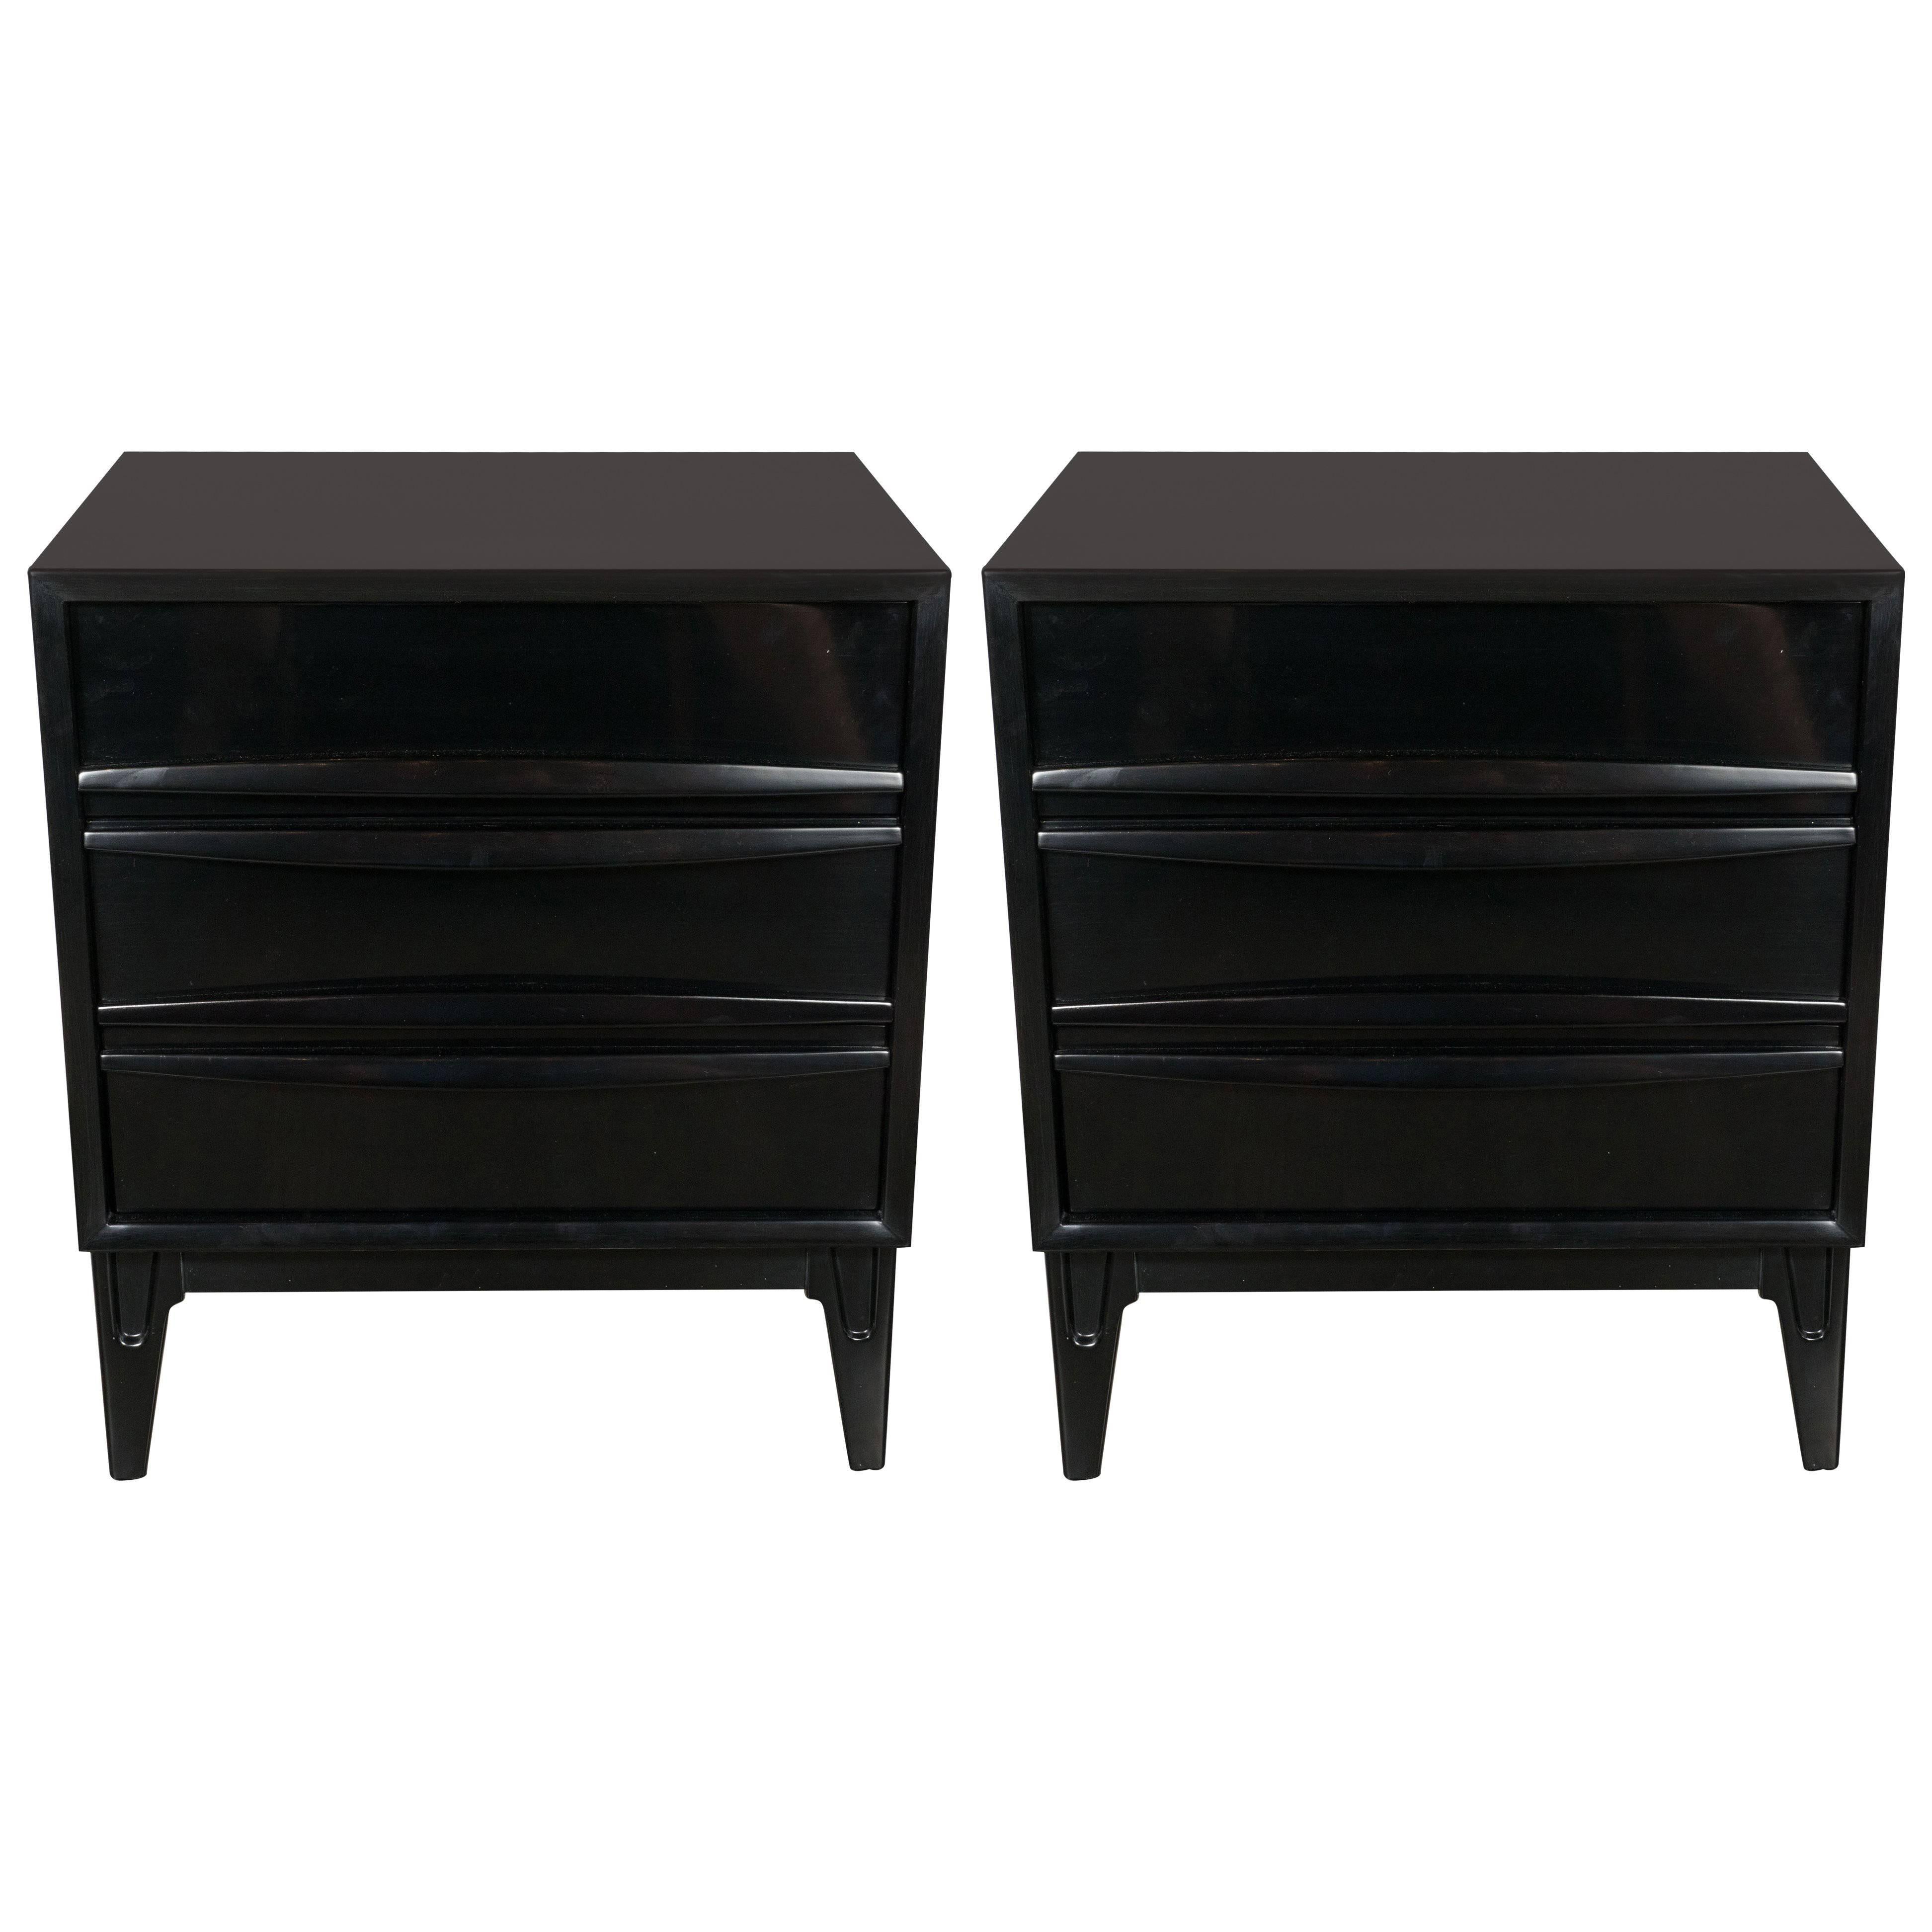 Ebonized Walnut Mid-Century Modern Sculptural End Tables or Nightstands